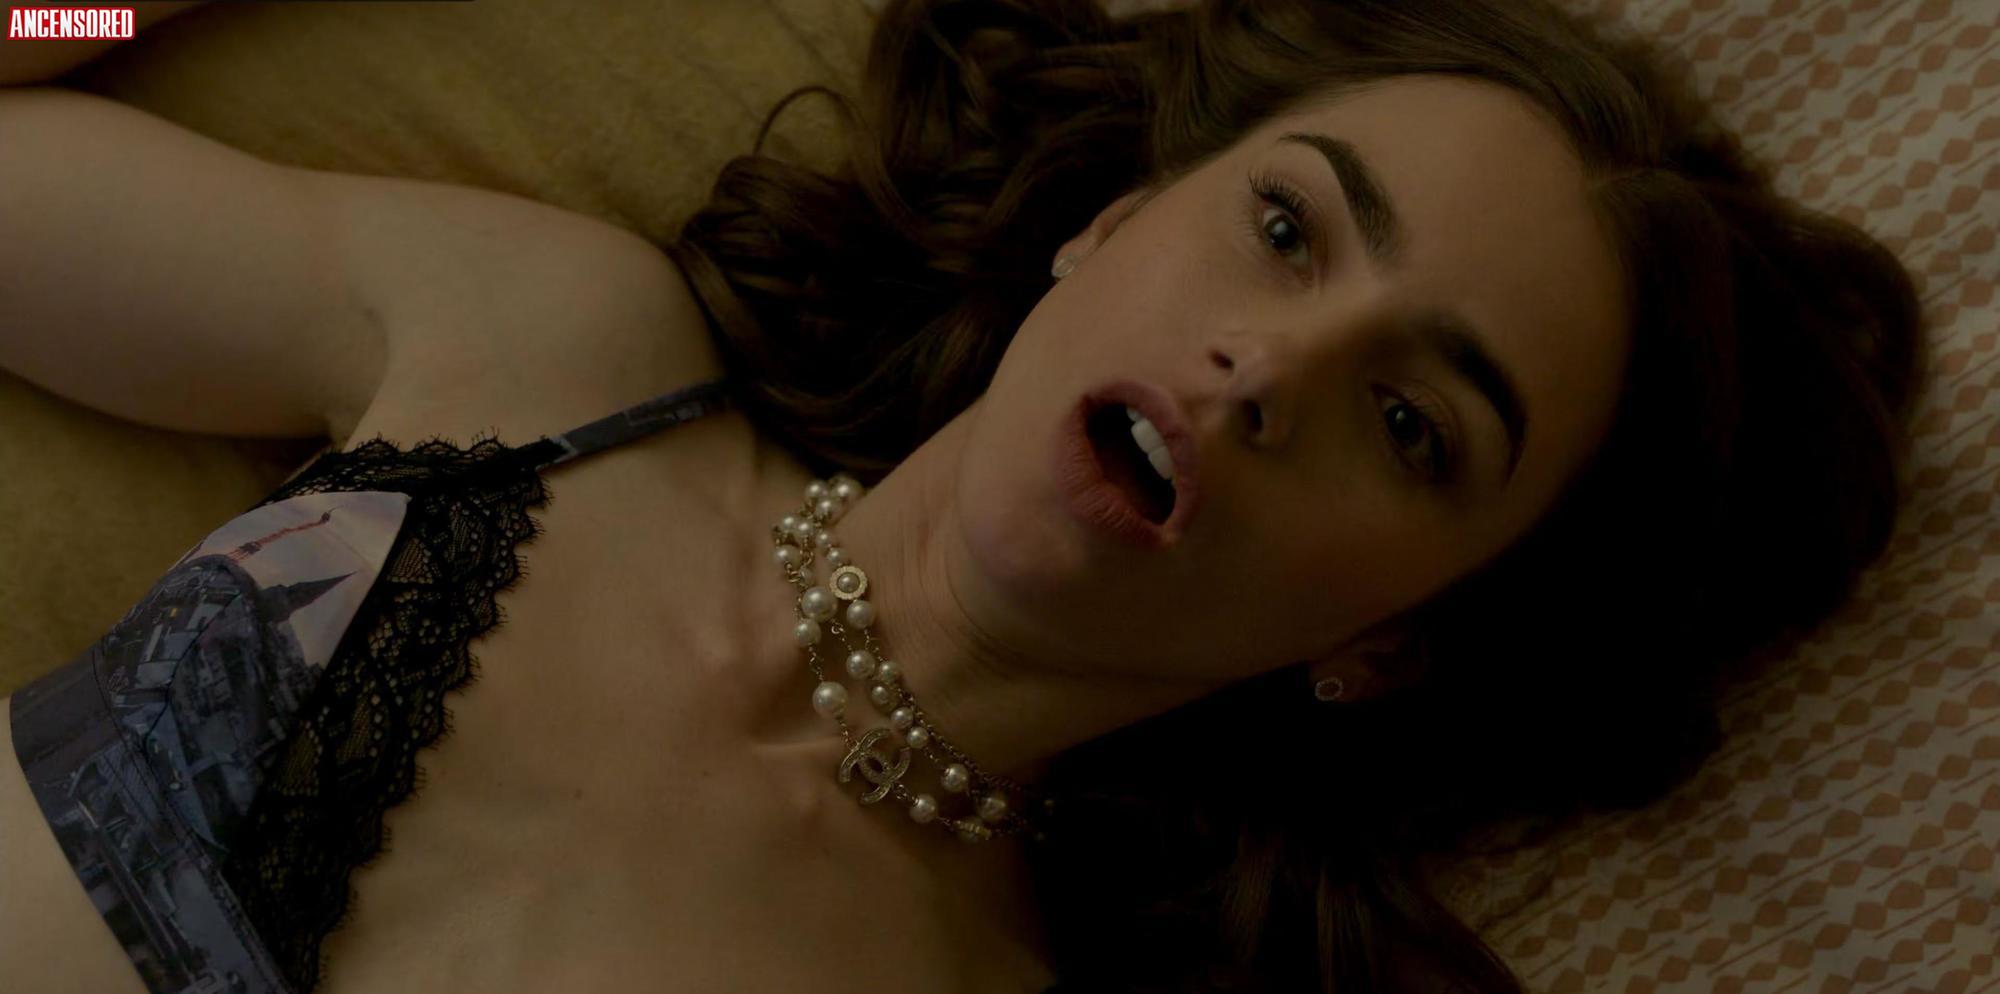 Lily collins nude pictures